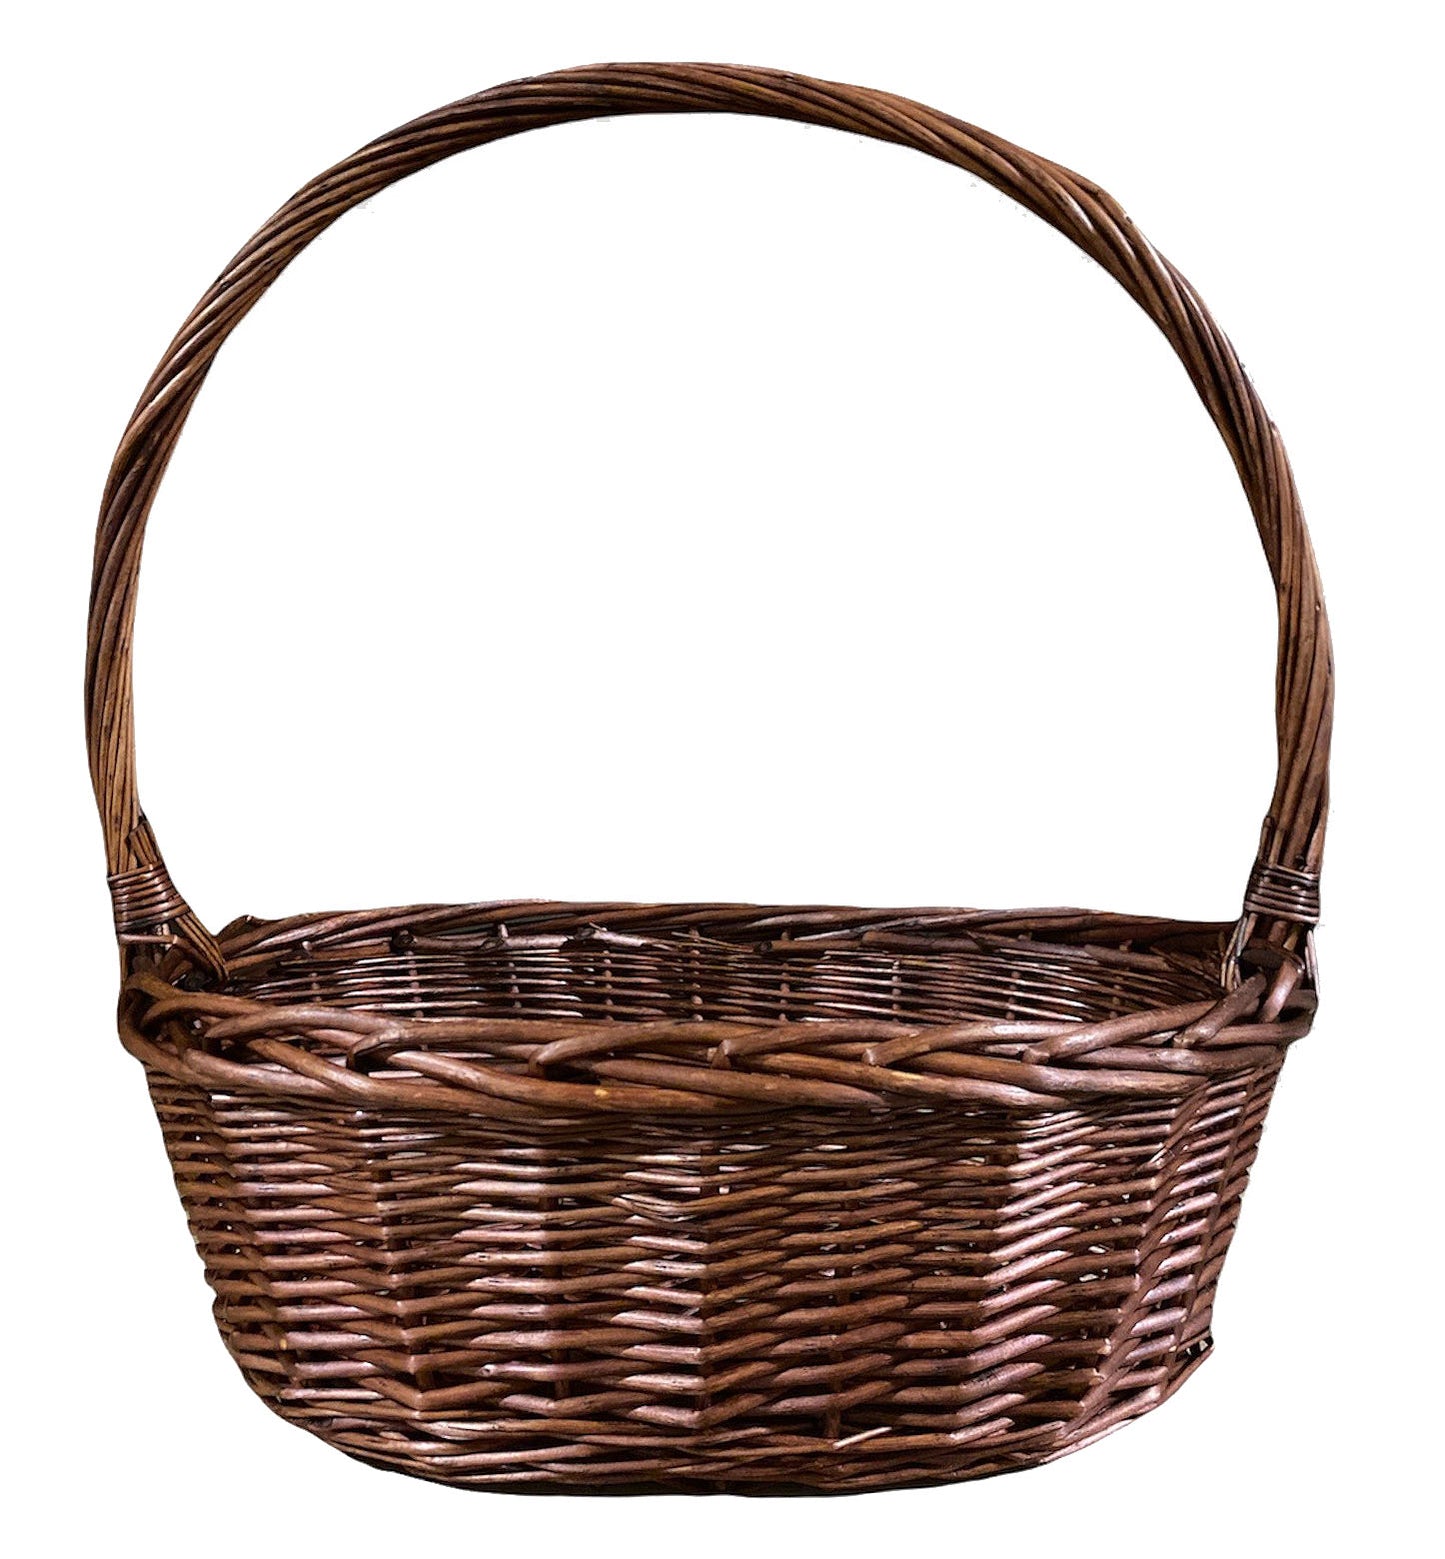 WILLOW OVAL BASKET STAINED 17x12.5x6x19 HH
(Fits 26 x 40 Cello bag)